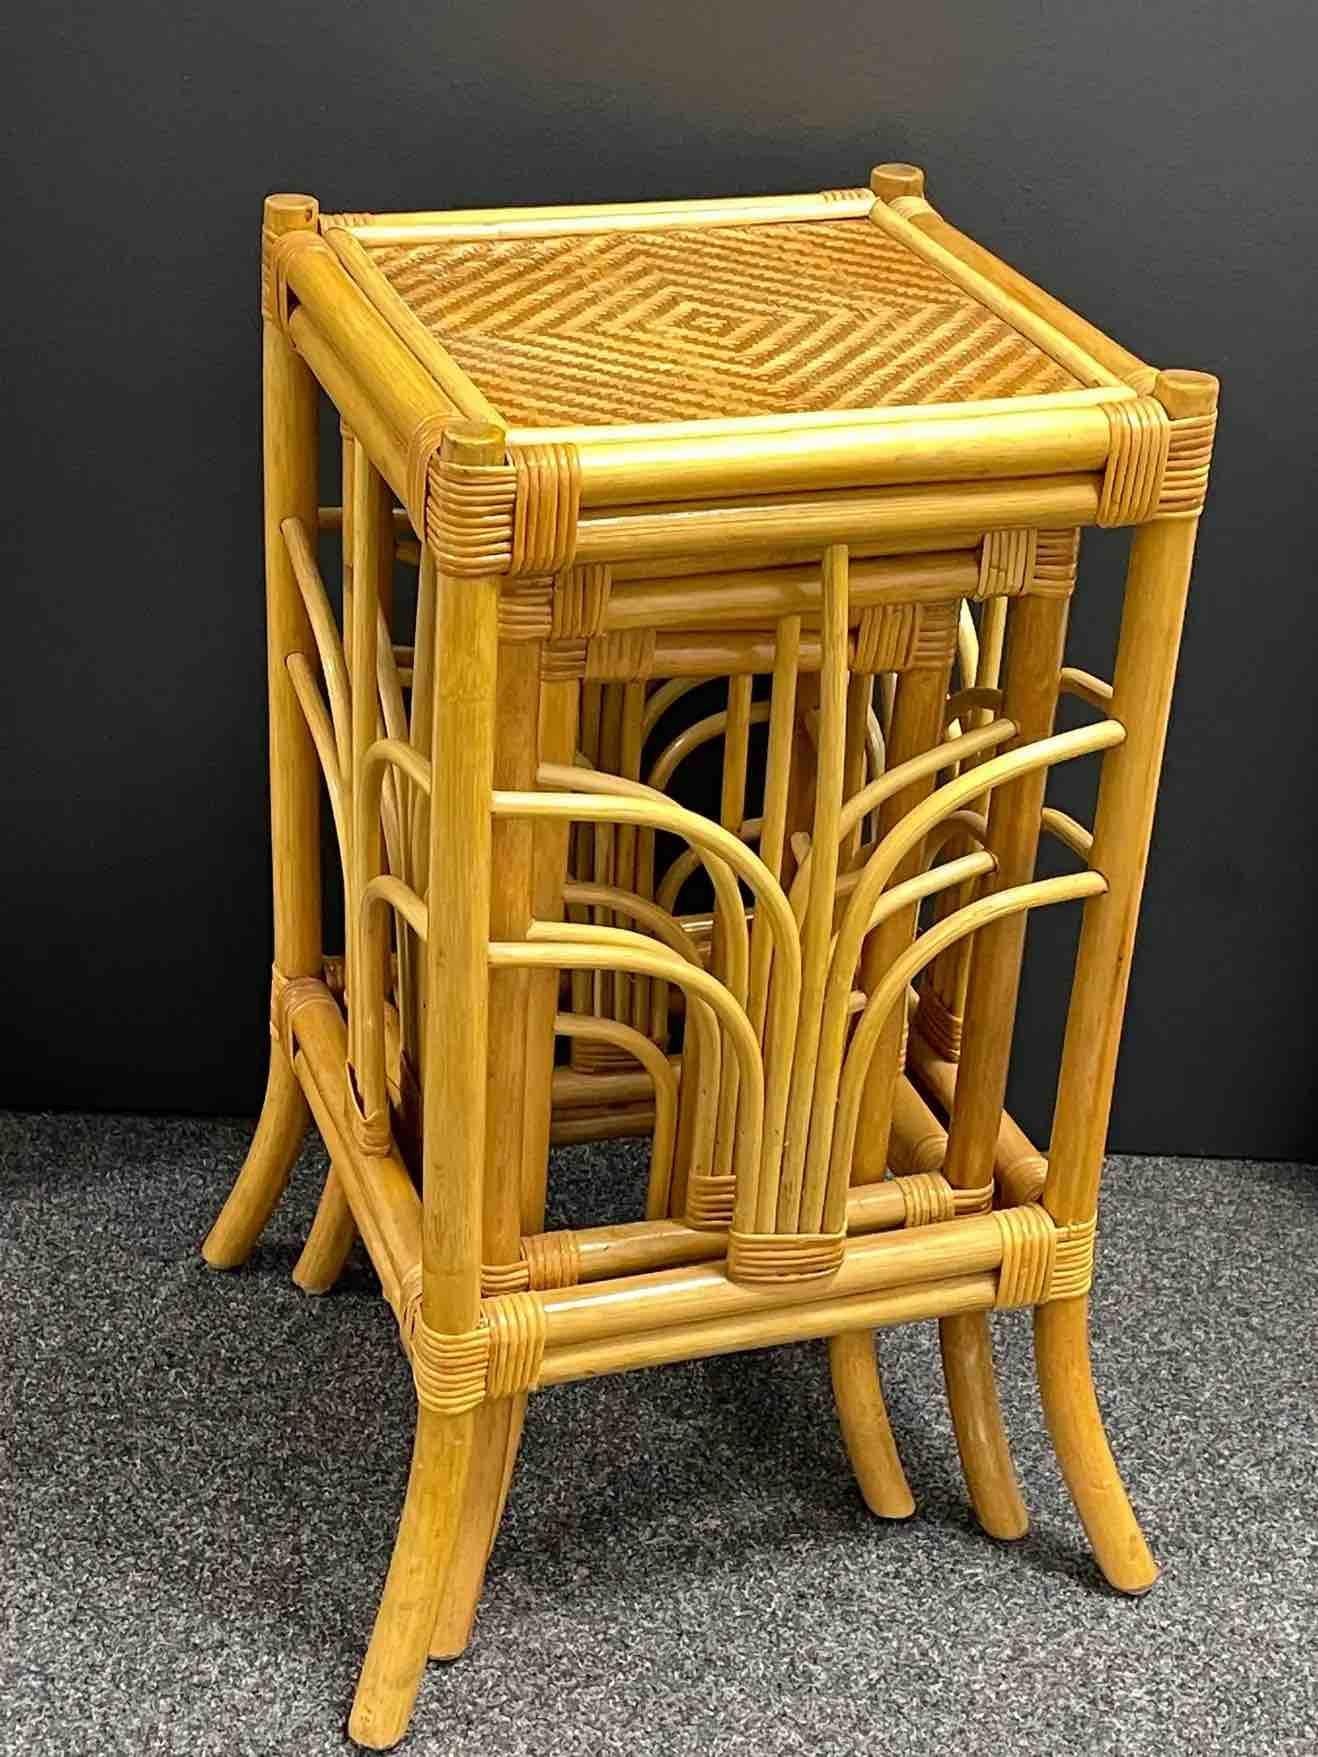 Handsome set of three vintage Bohemian bamboo plant stands. The group consists of three plant stands of graduating size. The trendy boho stands are made of rattan / bamboo. These are time capsule pieces in outstanding original condition. Absolutely